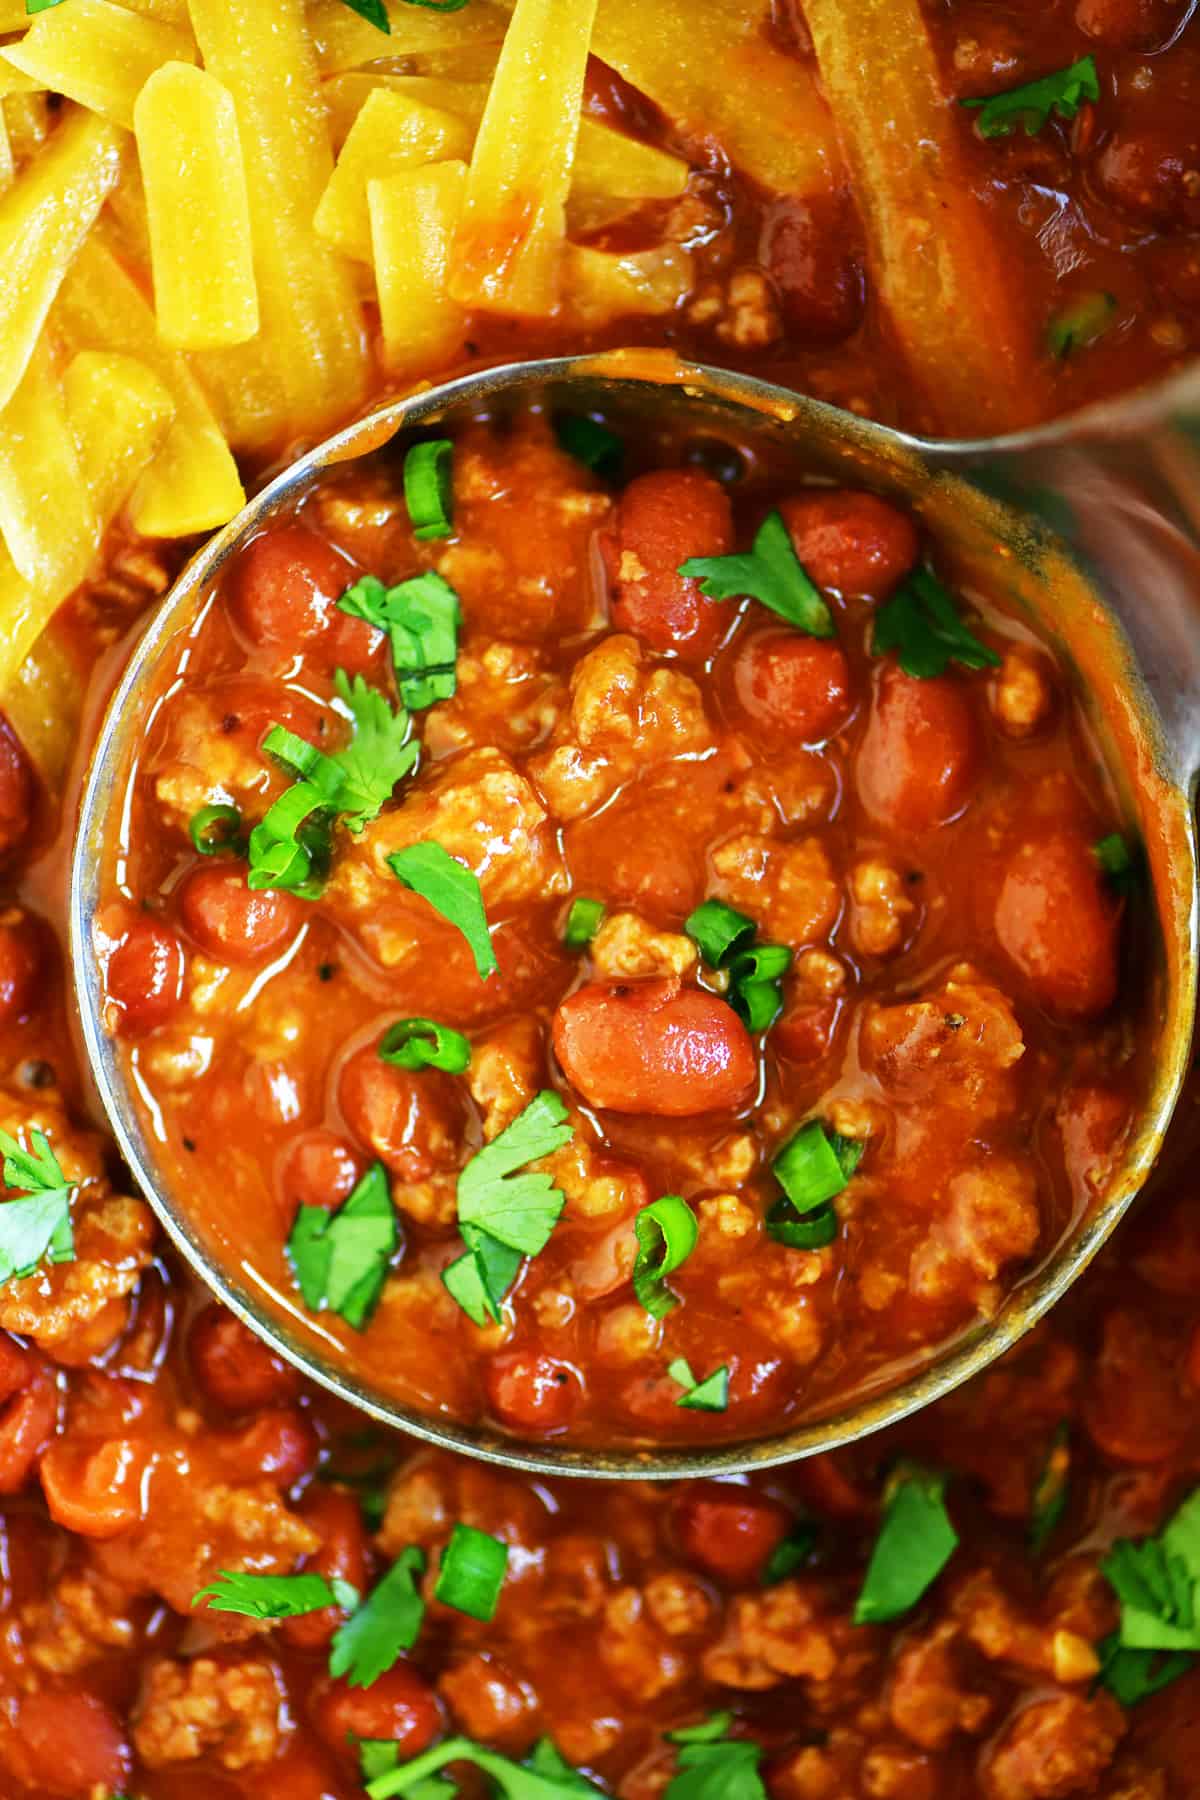 a close-up of the fully cooked easy chili recipe.